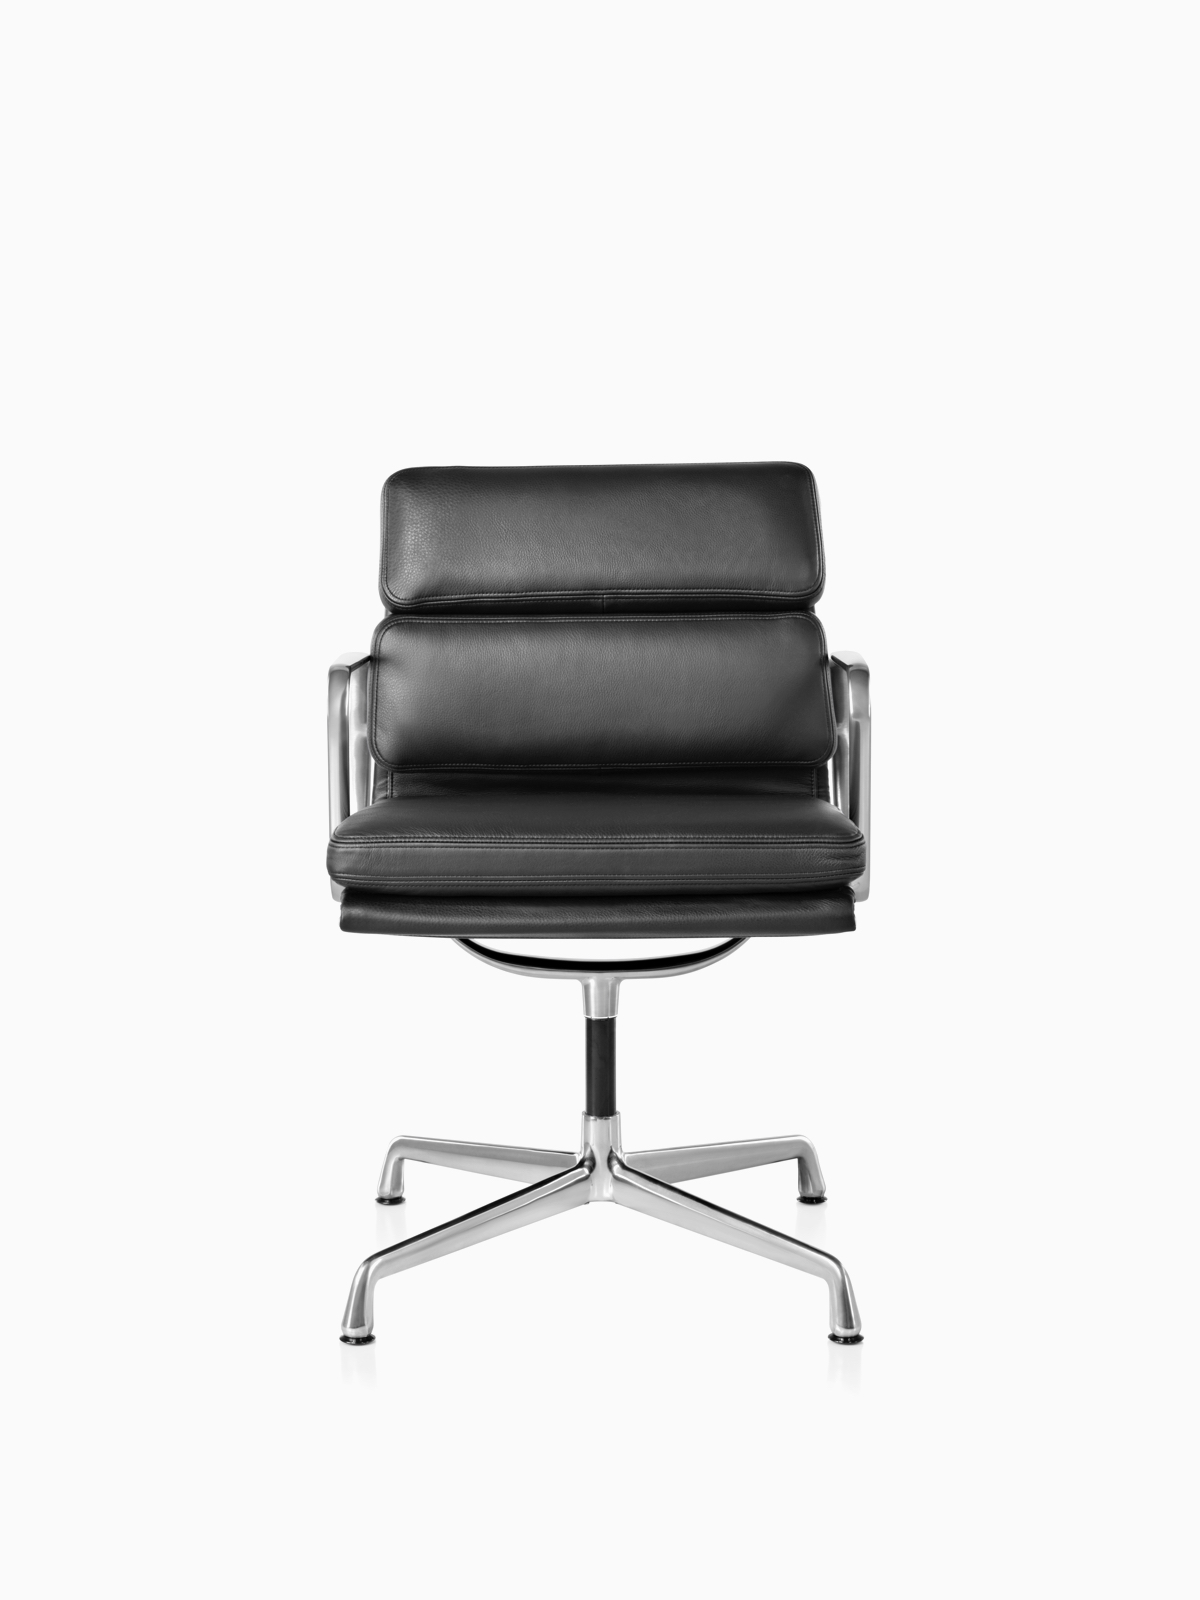 Eames Soft Pad Chairs